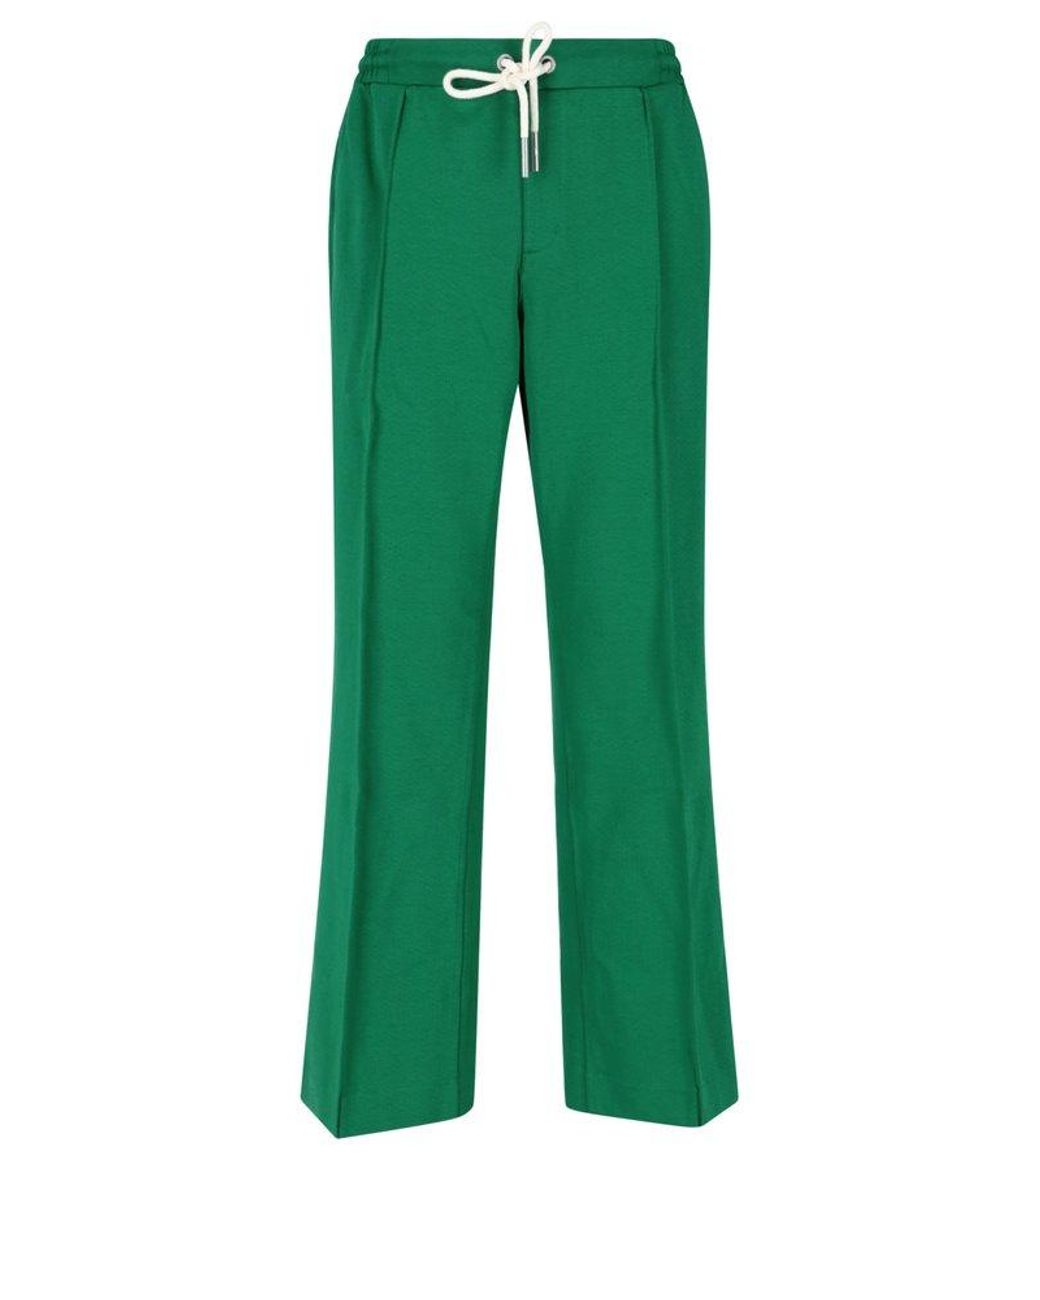 PUMA X Ami Elasticated Waistband Pants in Green for Men | Lyst